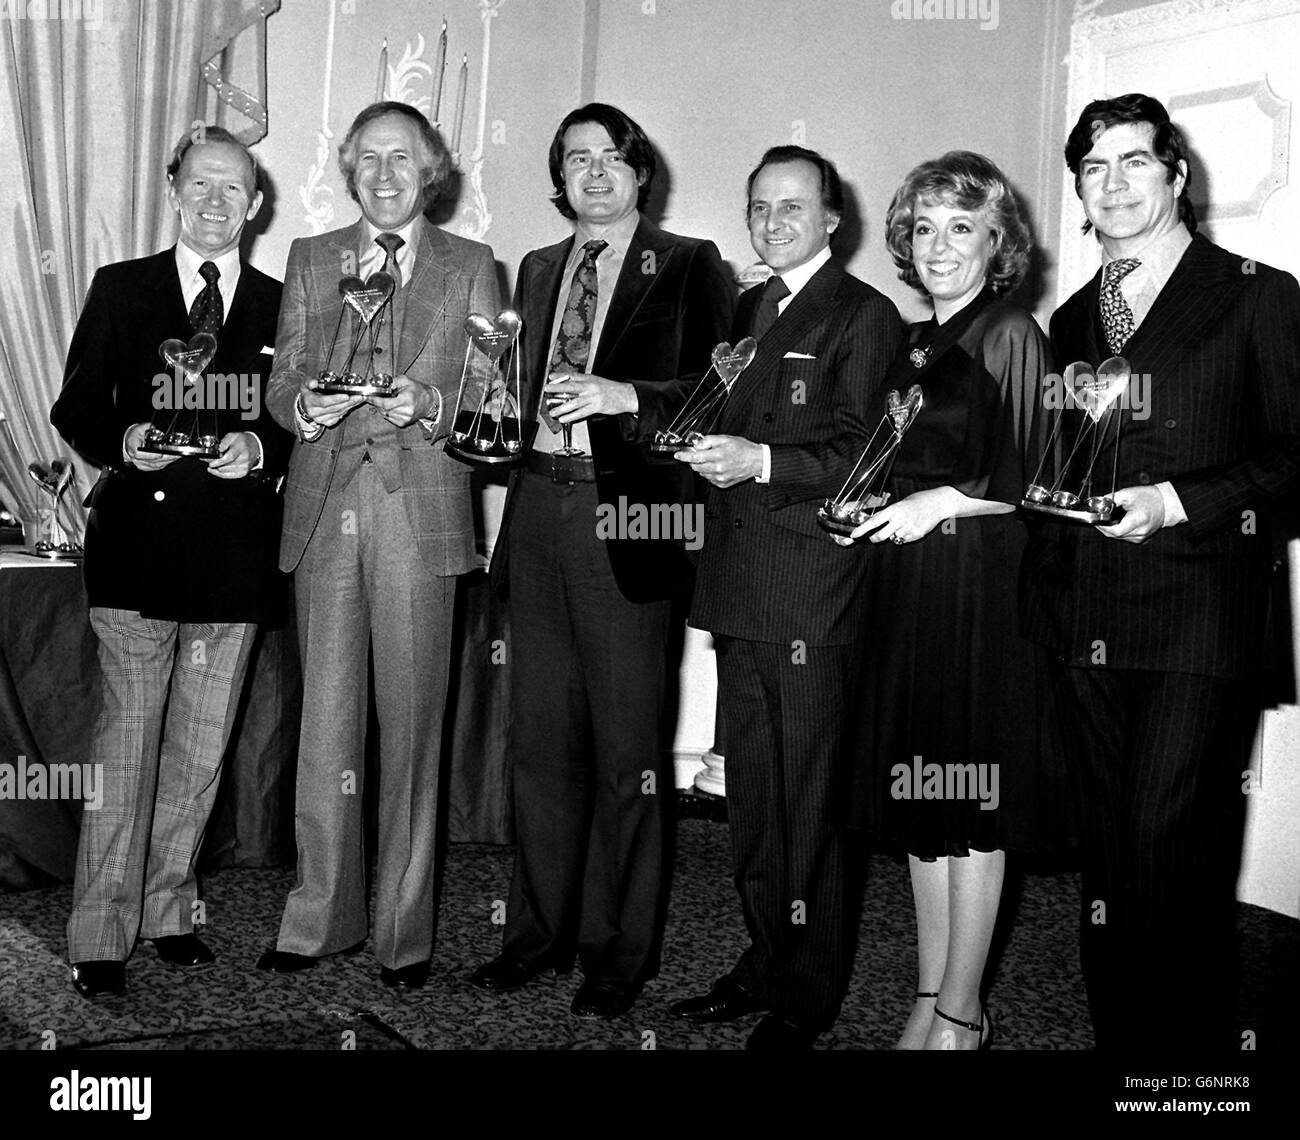 Variety Club of Great Britain's Show business luncheon at the Dorchester Hotel, the following received awards. (Left to right) Gordon Jackson (ITV Personality); Bruce Forsyth (Show Business Personality of 1975); Simon Gray (Show Business writer, for his play Otherwise Engaged); David Jacobs (BBC Radio Personality); Esther Rantzen (Joint BBC TV Personality) and Alan Bates (Stage actor, for his performance in Otherwise Engaged). Stock Photo